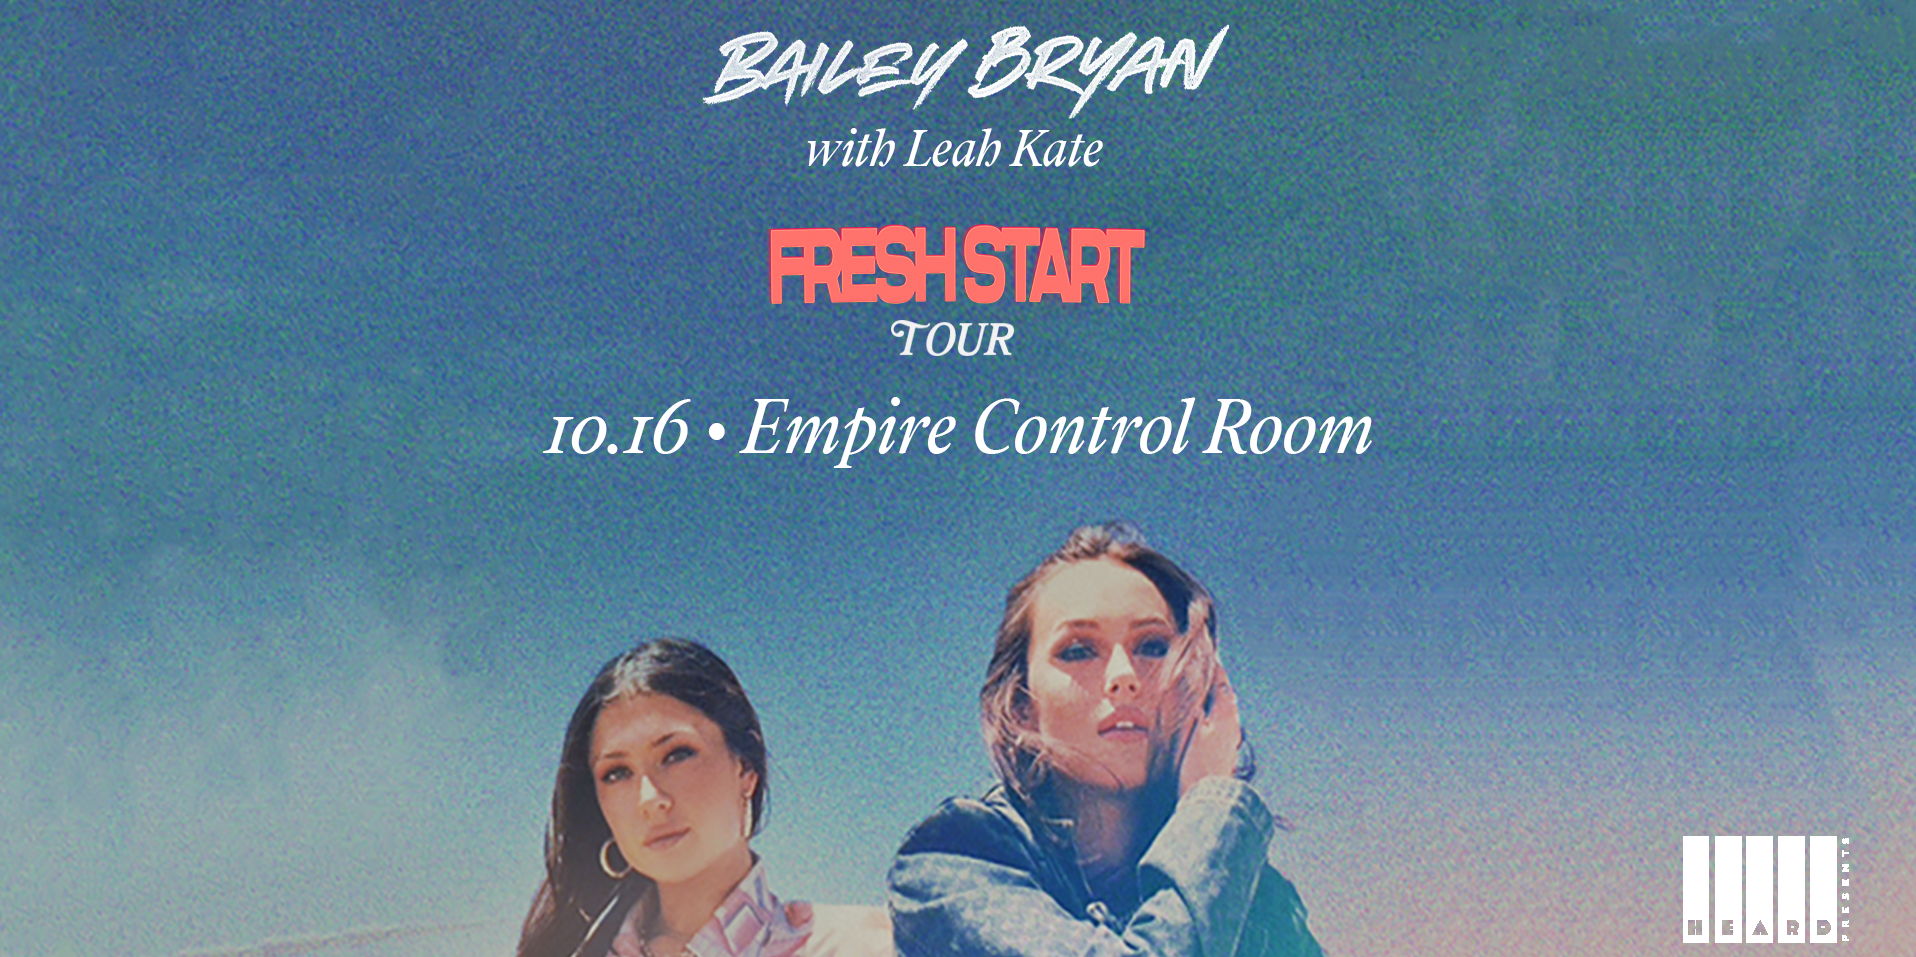 Bailey Bryan with Leah Kate at Empire Control Room 10/16 promotional image